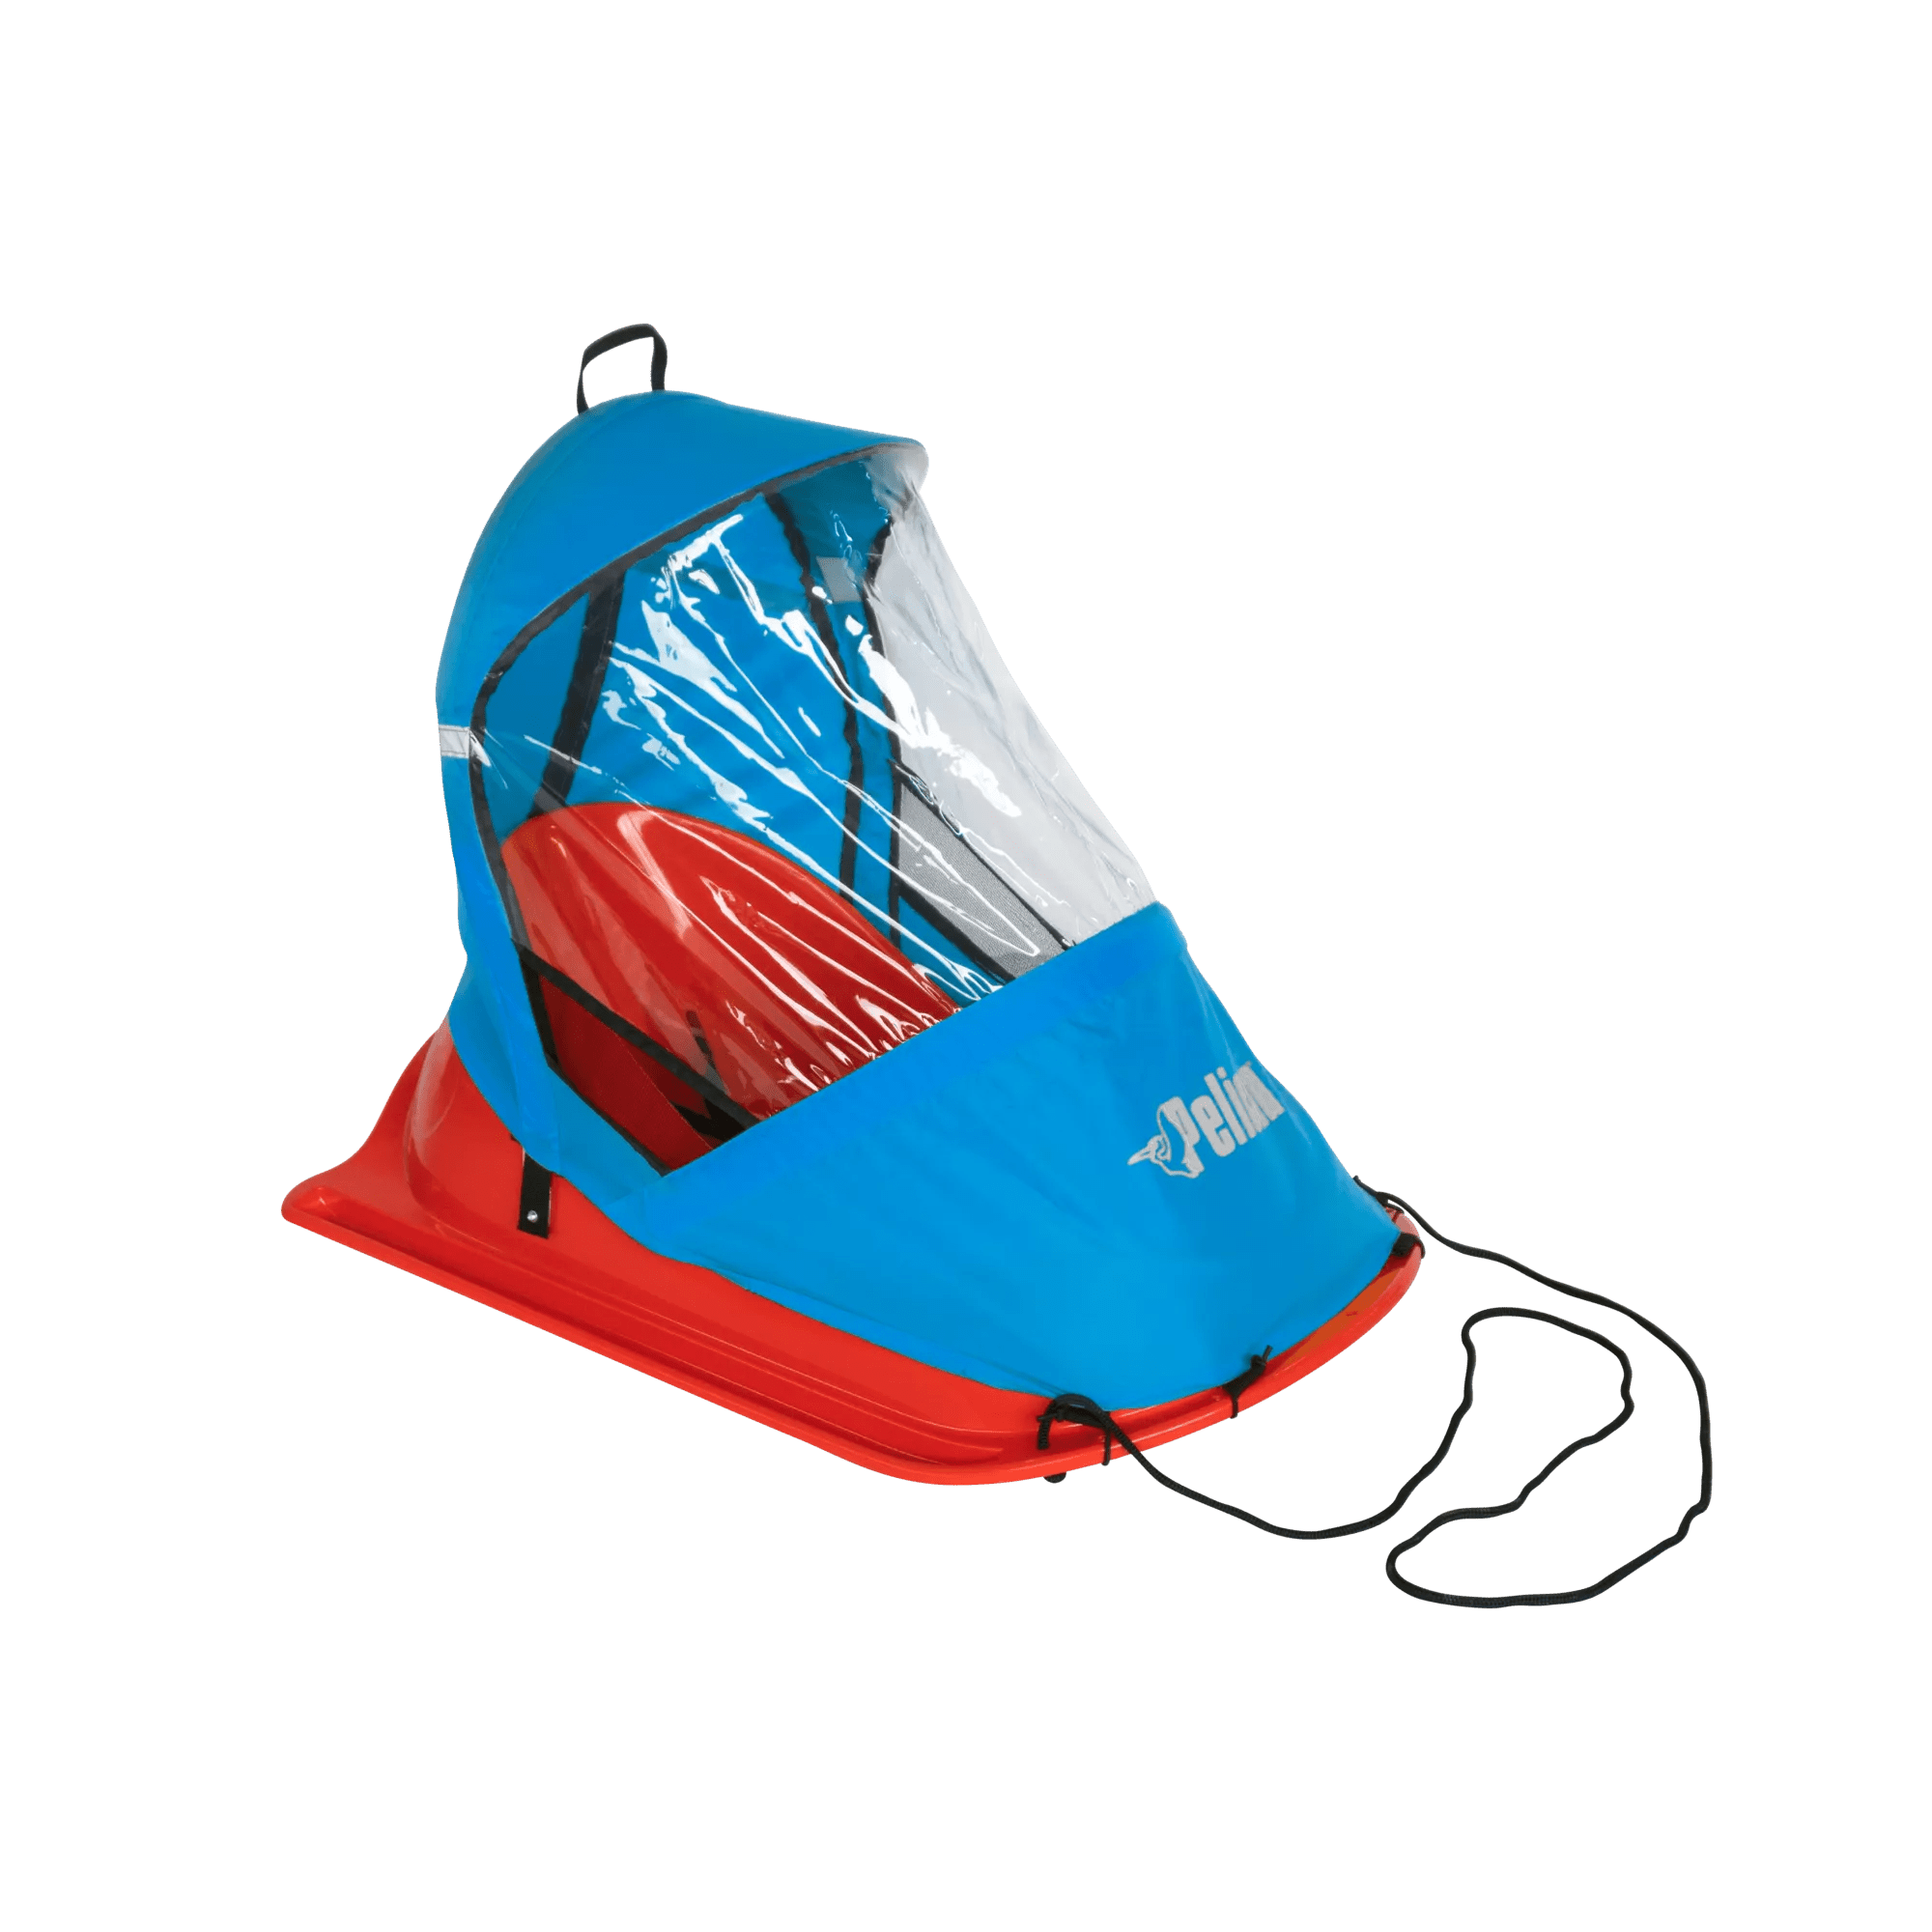 PELICAN - Baby Sled Deluxe - Red - LEI33PK06-00 - ISO 